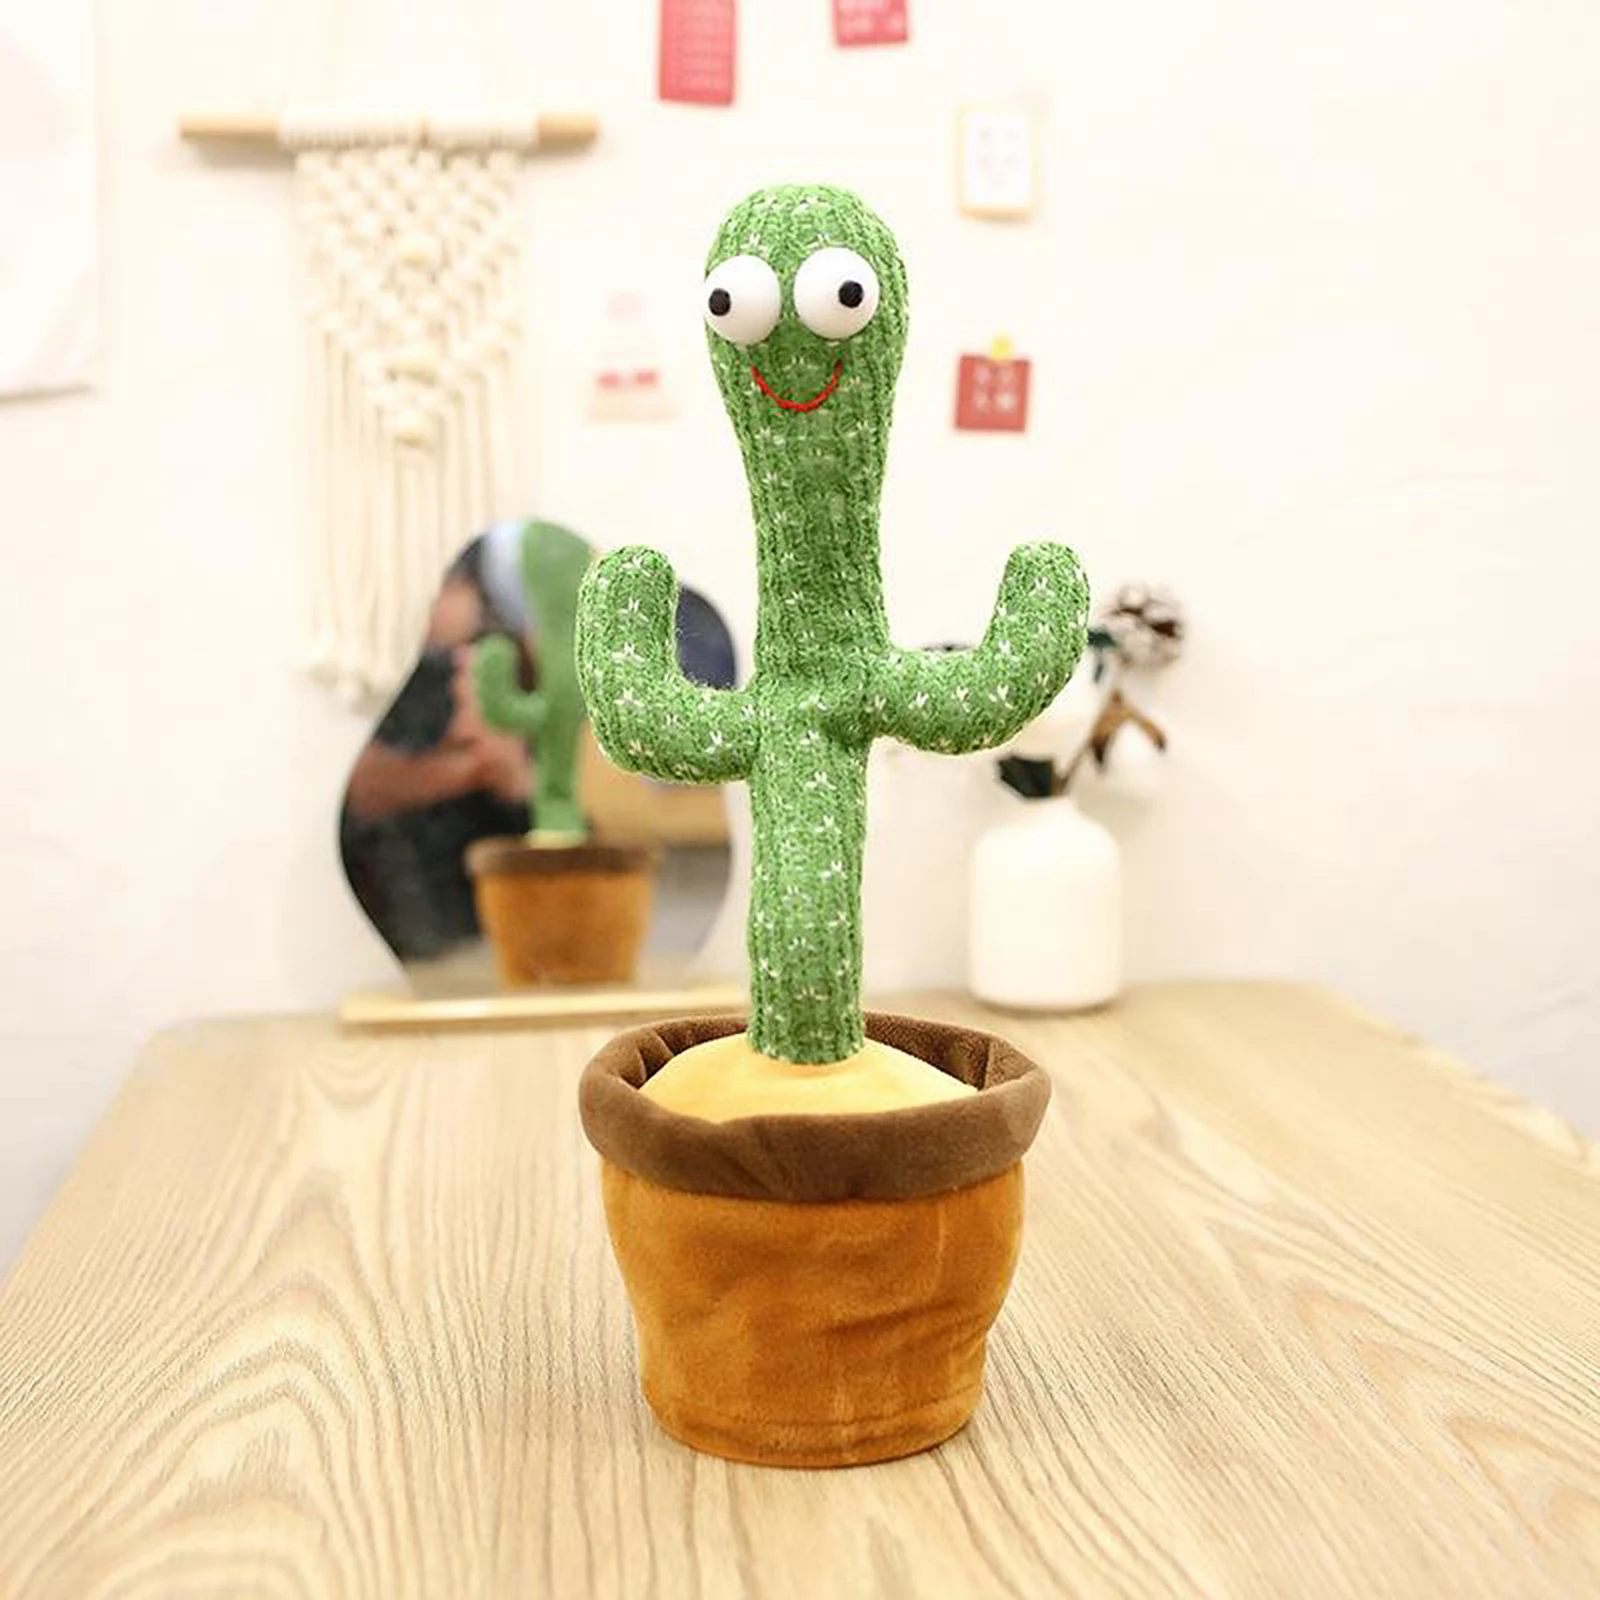 

120 English Songs Electric Cactus Doll Twist Dancing Toy Decor Recording Parrot USB Cactus Plush Toy Funny Dancing Singing Toy